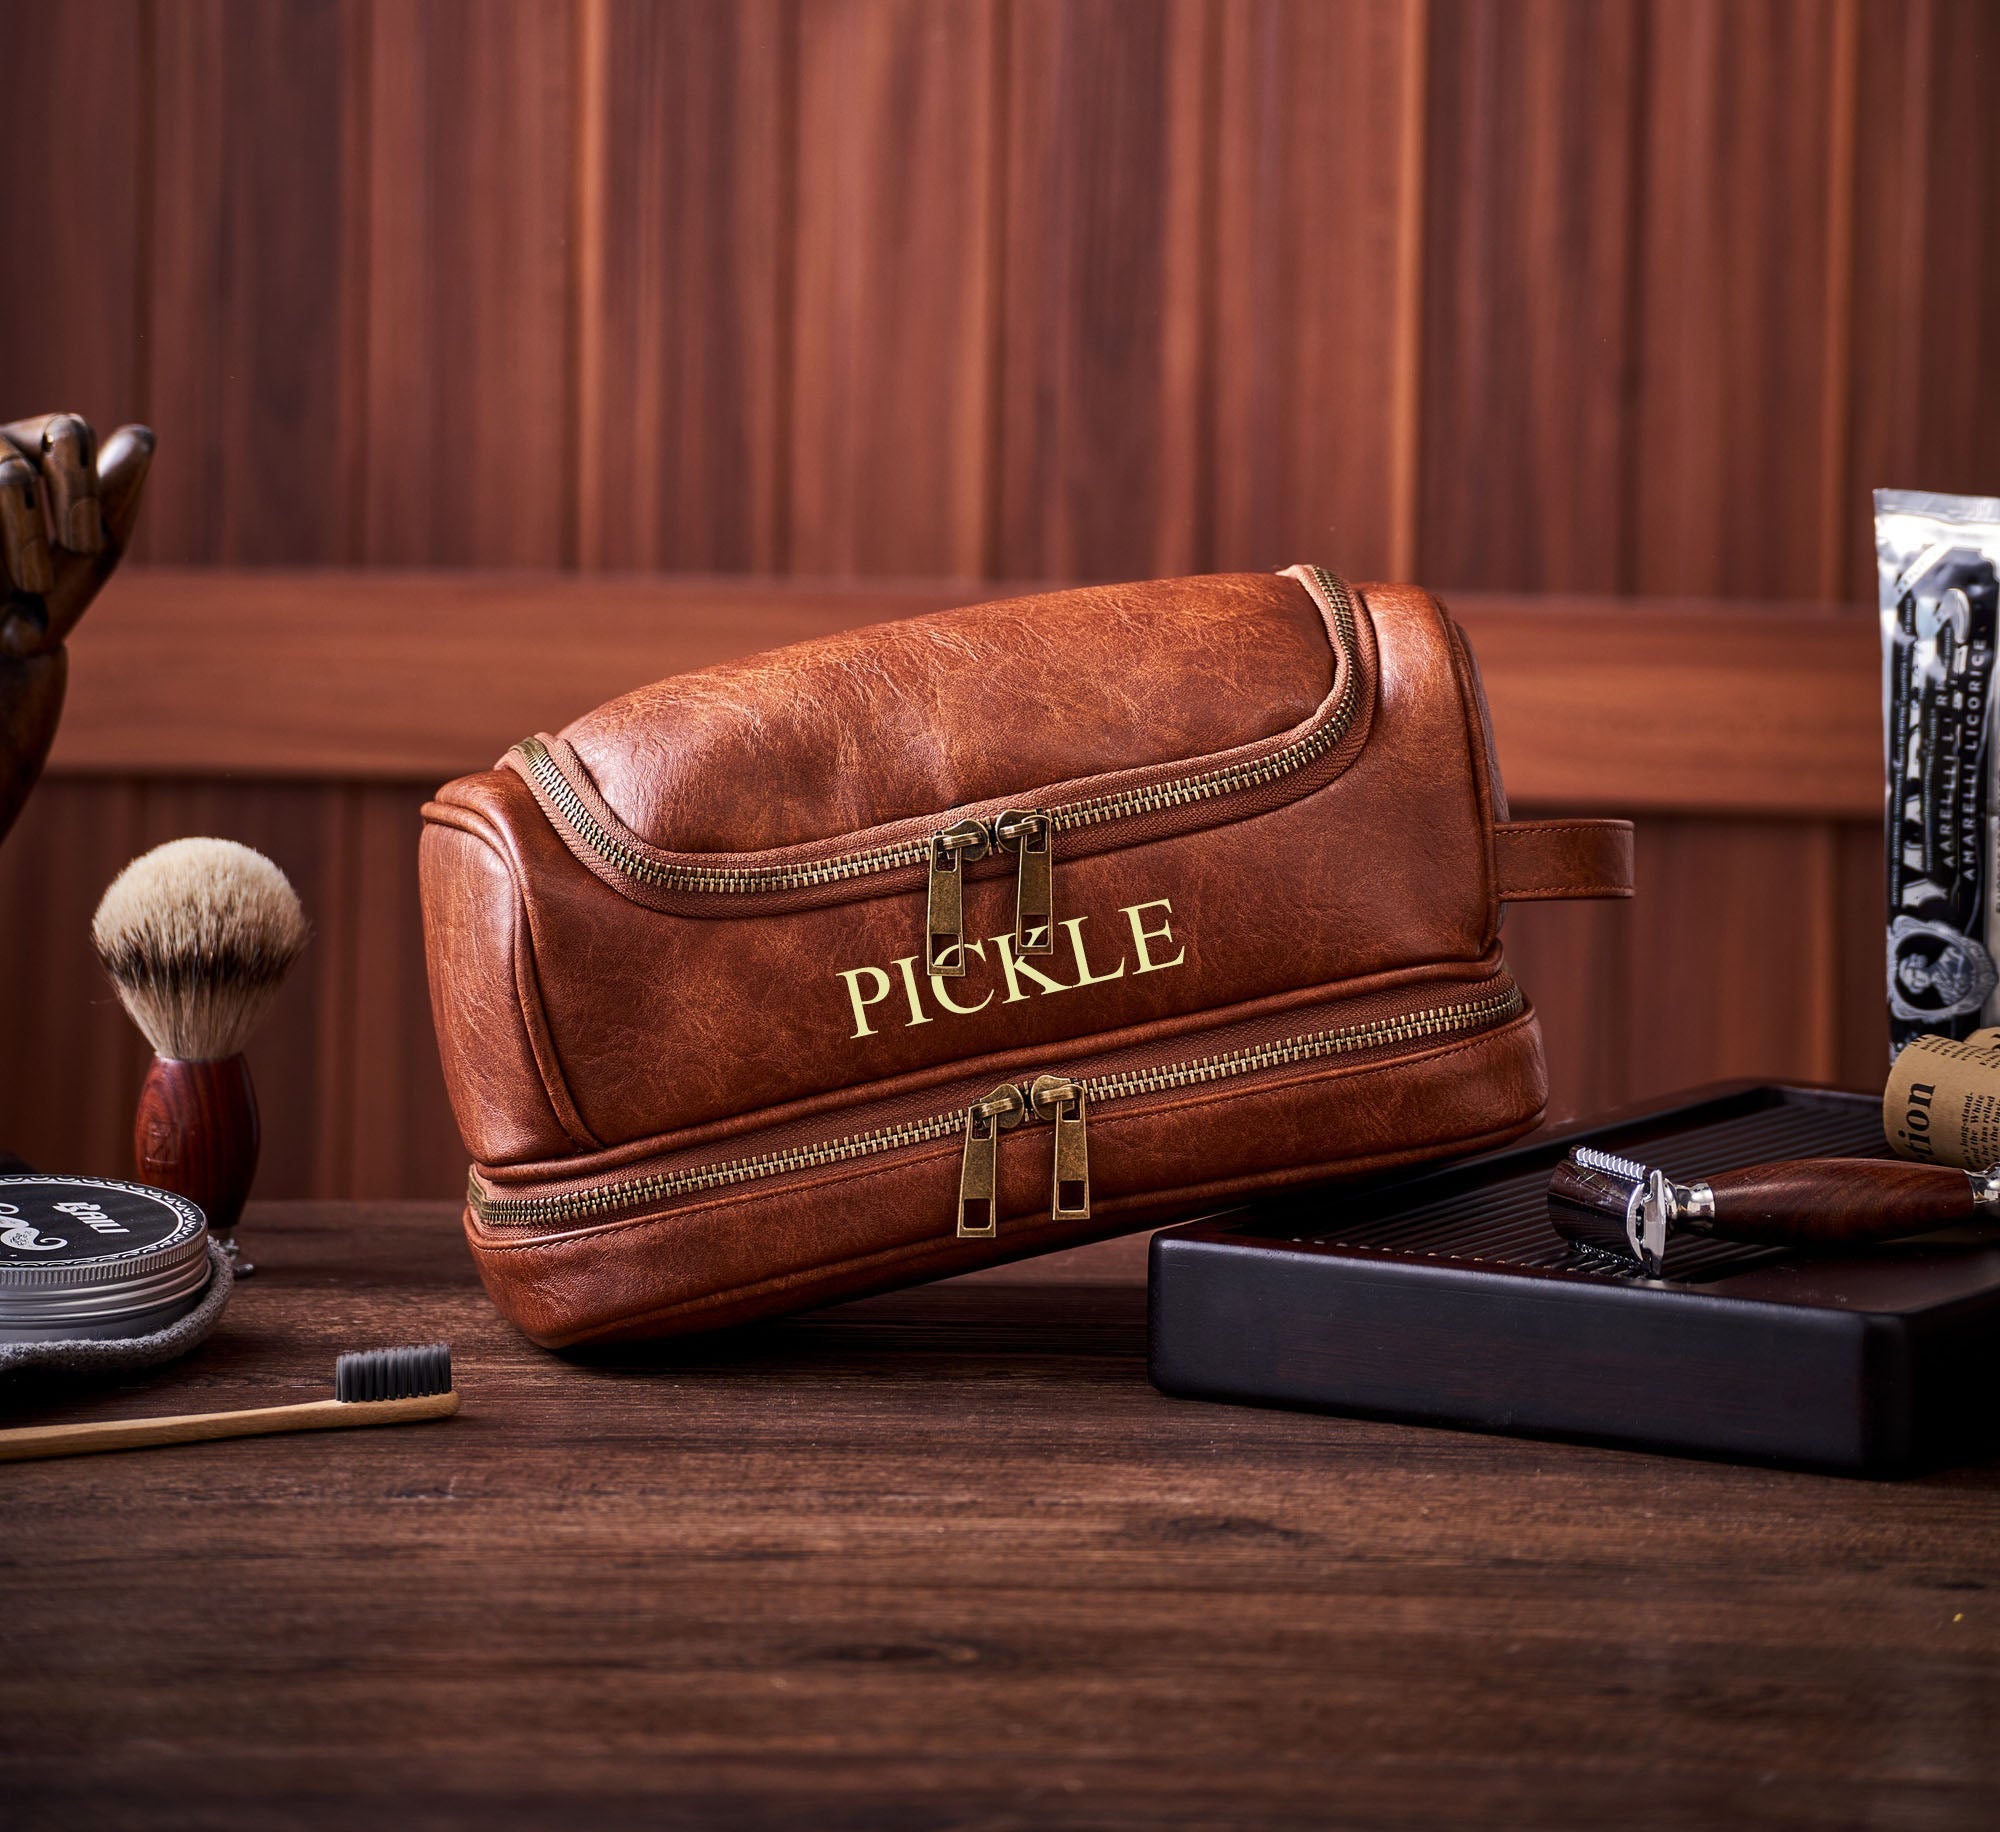 Personalized Canvas Toiletry Bag, Mens Dopp Kit, Groomsmen Gifts Ideas